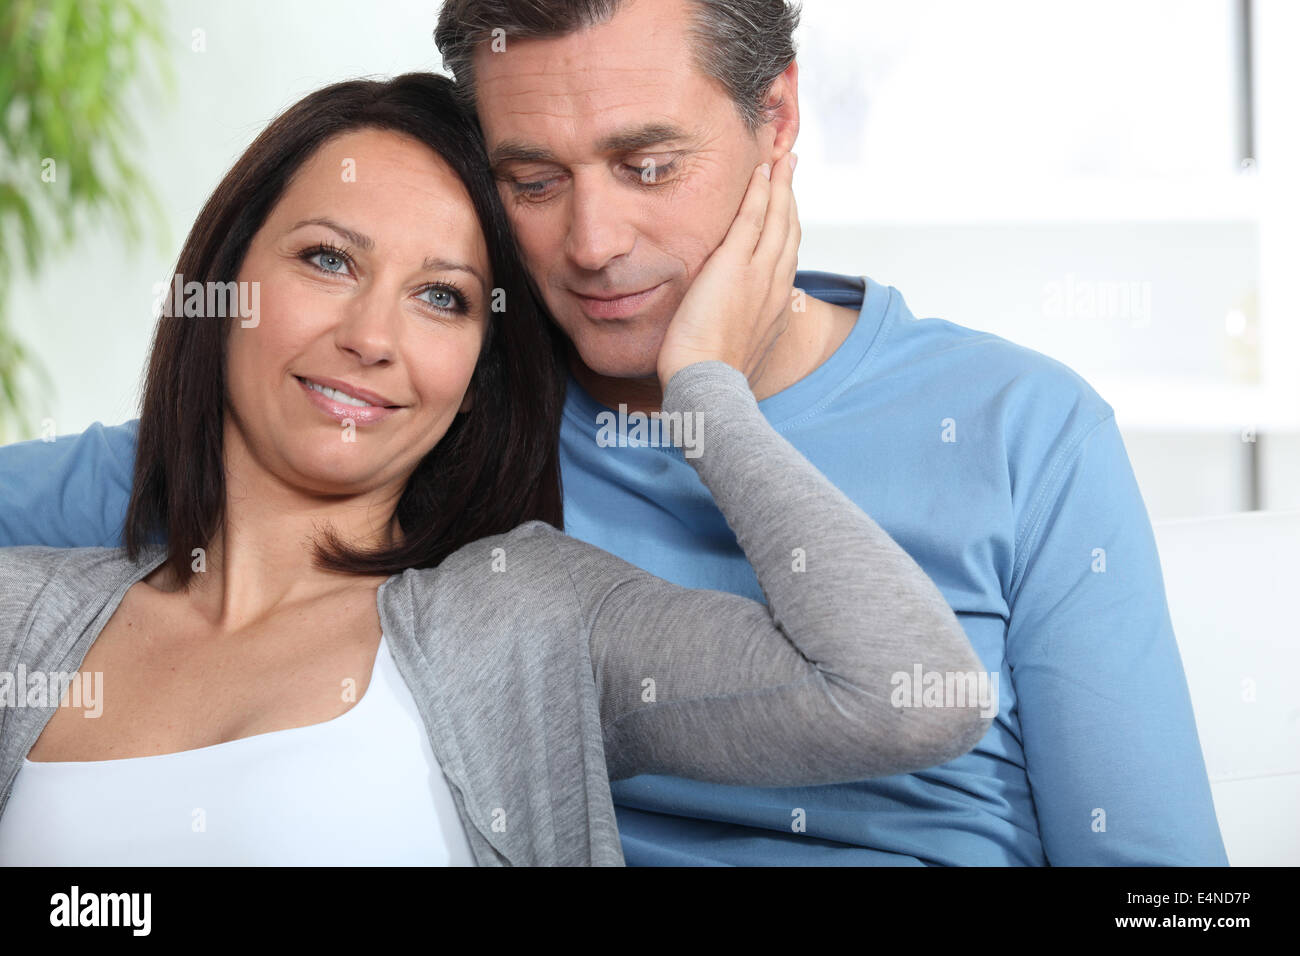 Portrait of an affectionate couple Stock Photo